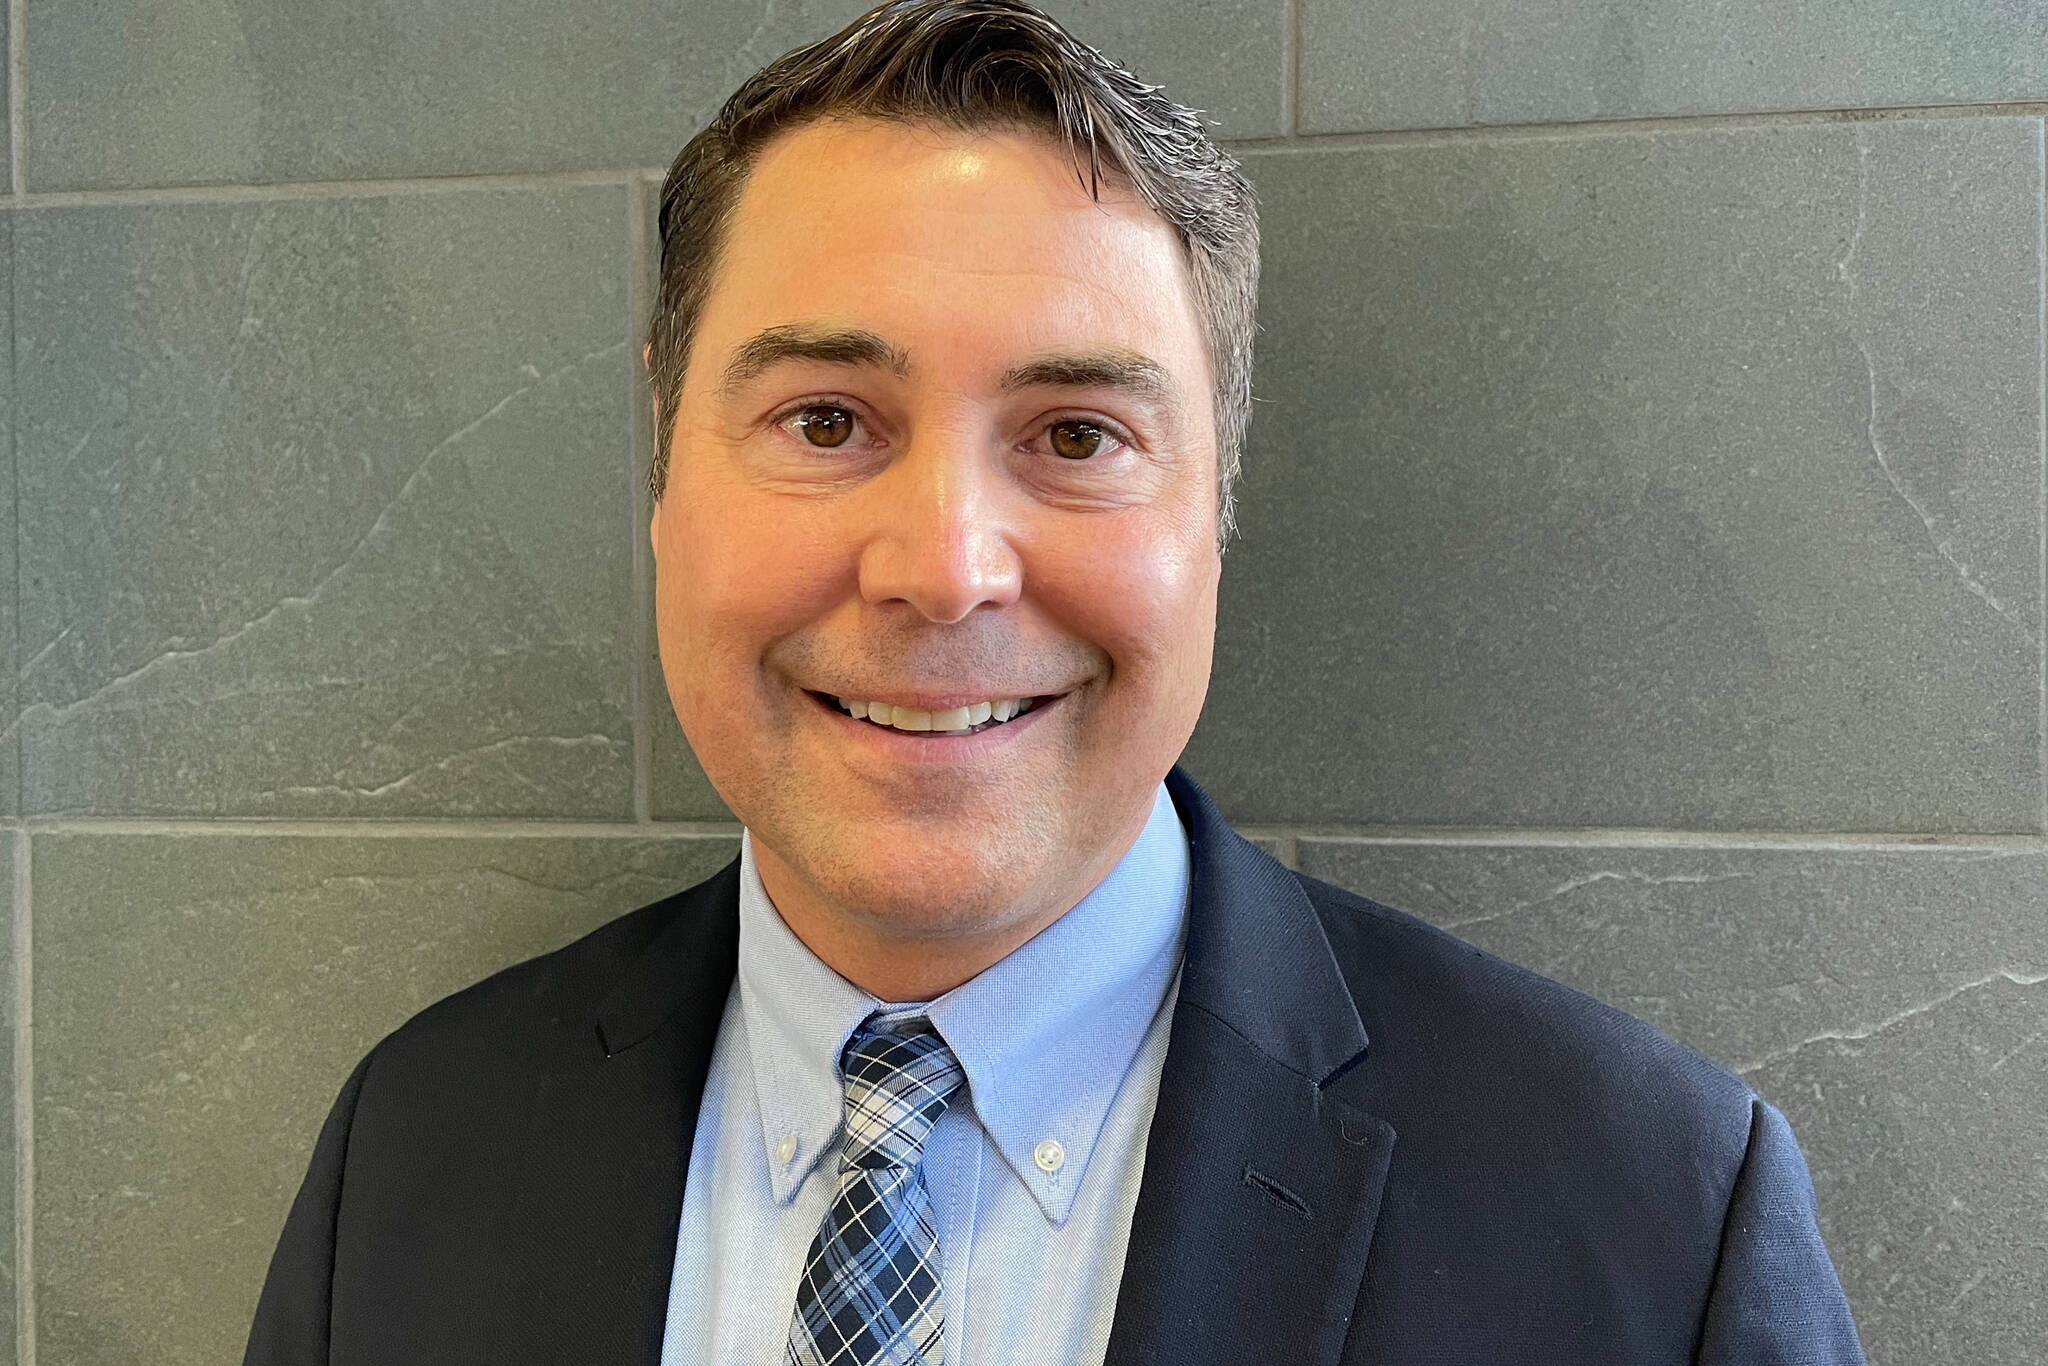 Michael S. Lockett / Juneau Empire File 
Shawn Arnold has been selected as principal of Thunder Mountain High School, to begin that role with the new school year in late July.